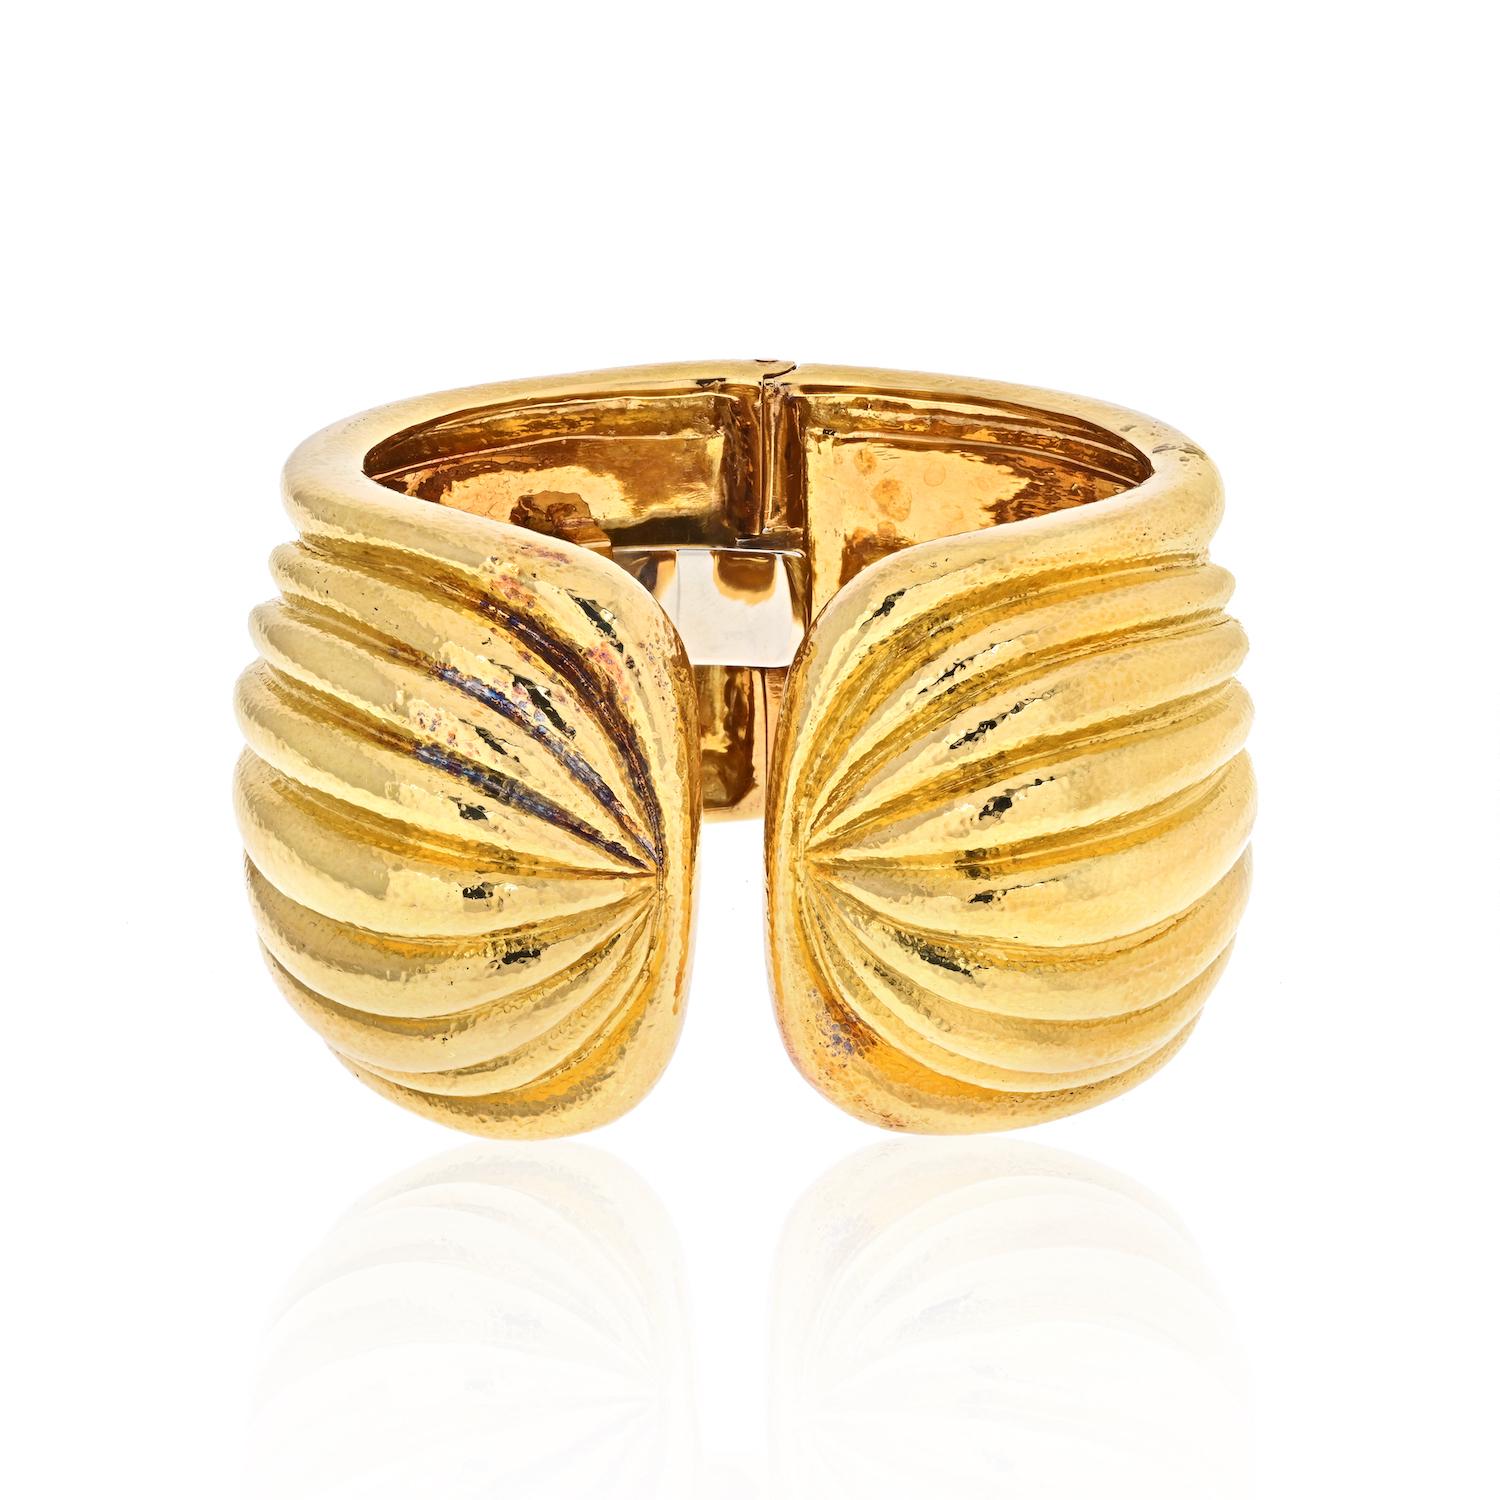 New York's 57th Street is where fashion and culture meet, and where David Webb had his boutique for many years. This is jewelry for sophisticates: urbane, stylish.

The Fluted cuff bangle from the 57th Street collection by David Webb is sure to